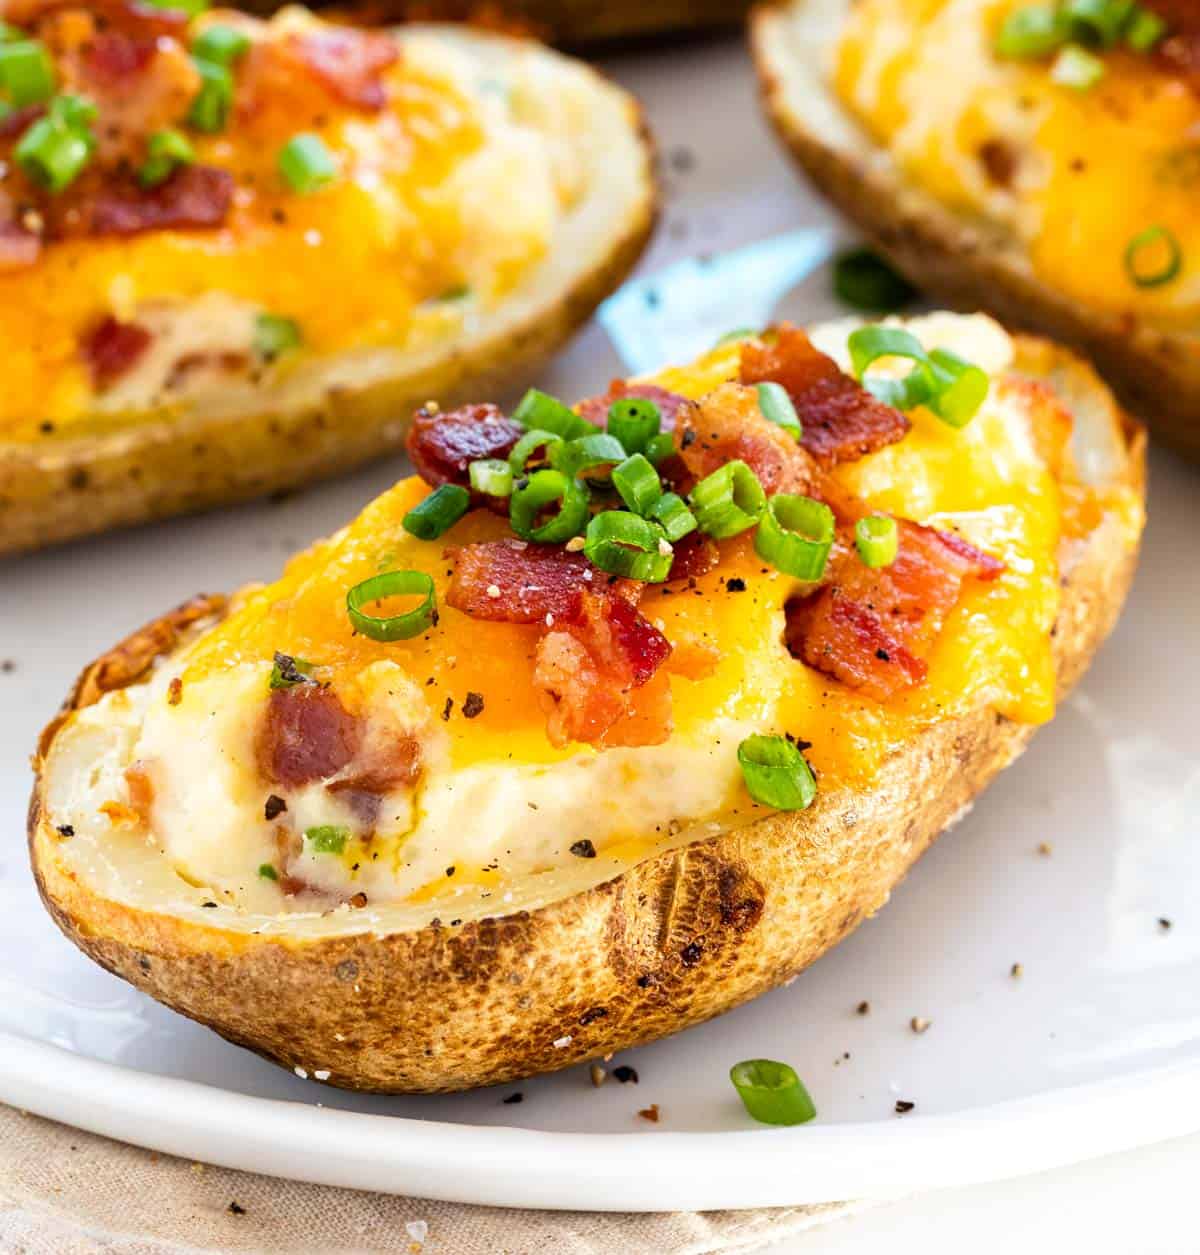 A Simple Microwaved-Baked Potato Recipe for You